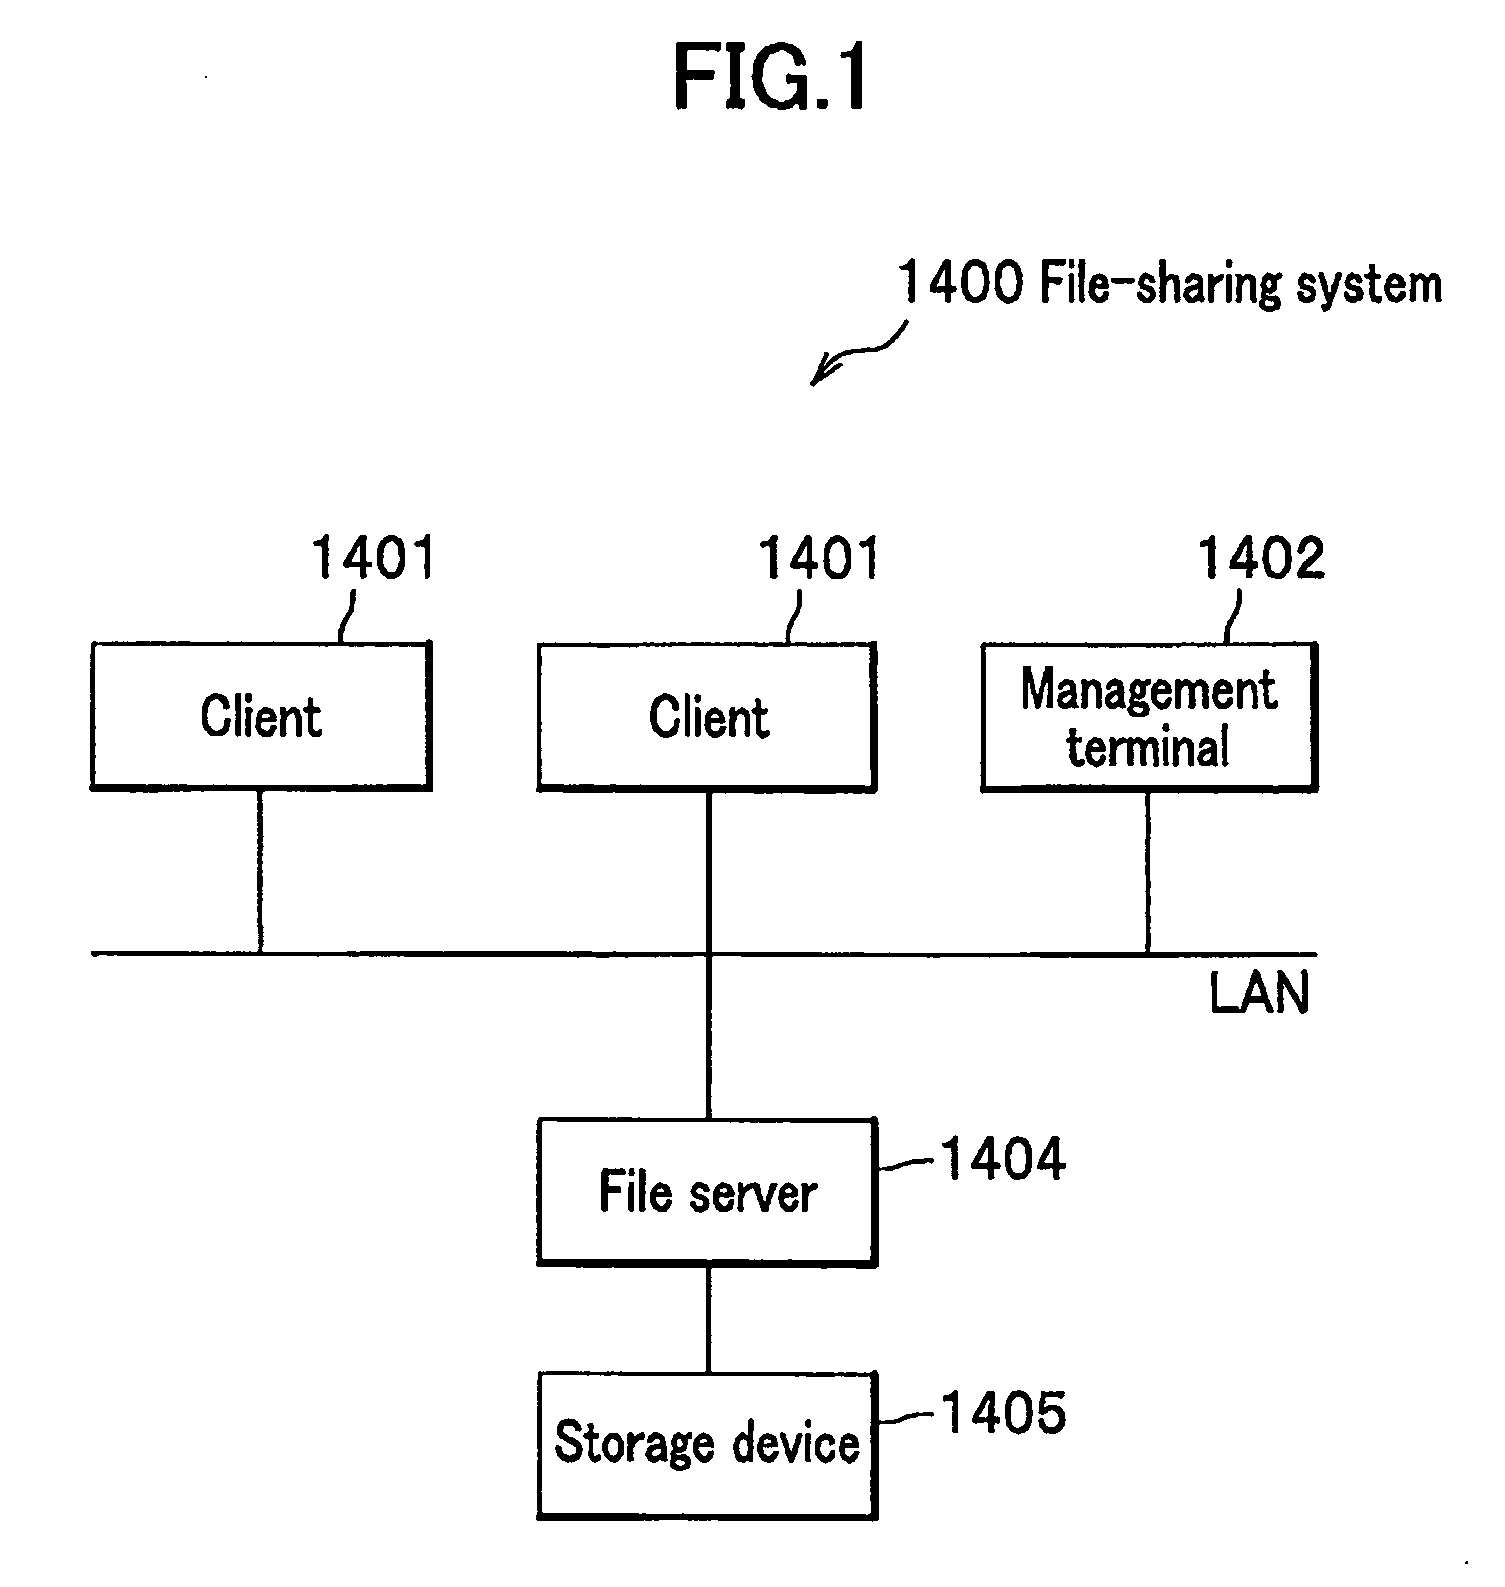 File sharing system, file server, and method for managing files